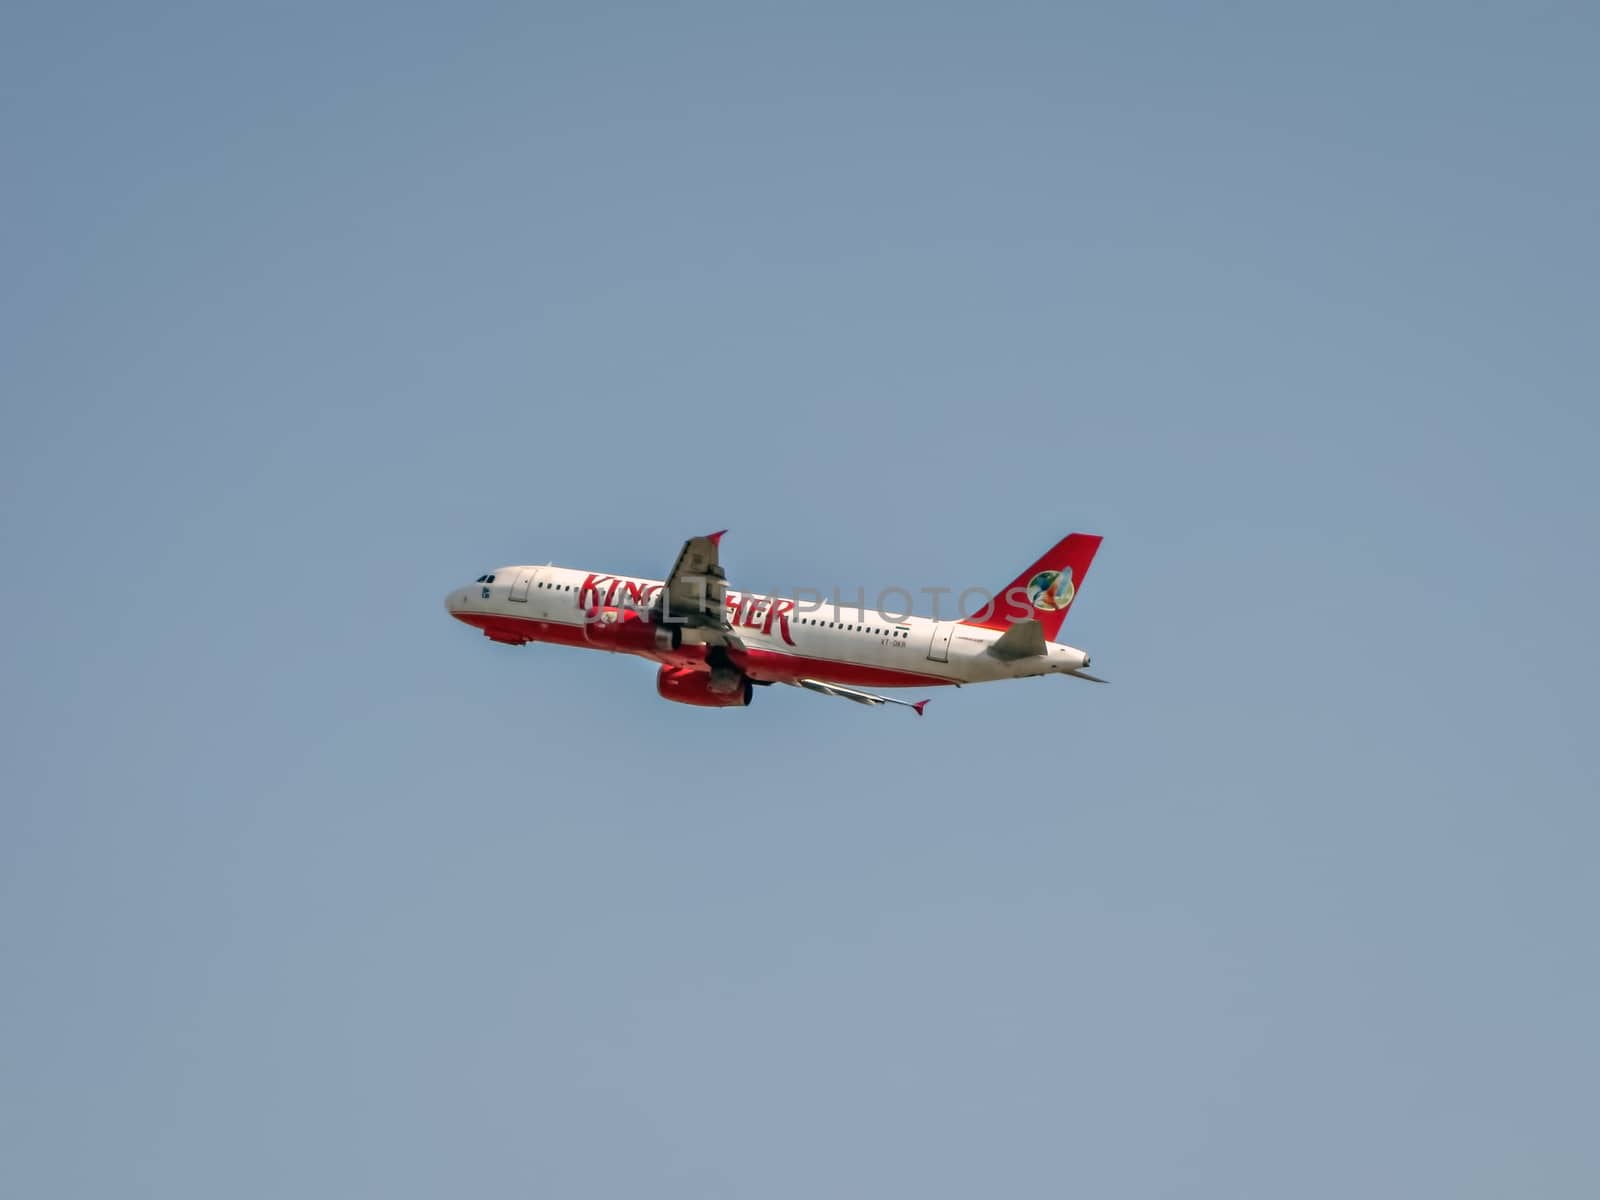 Close up image of  Kingfisher Airlines airbus A-320 # VT-DKR takes off from Leh IXL. Clear image with blue sky background.